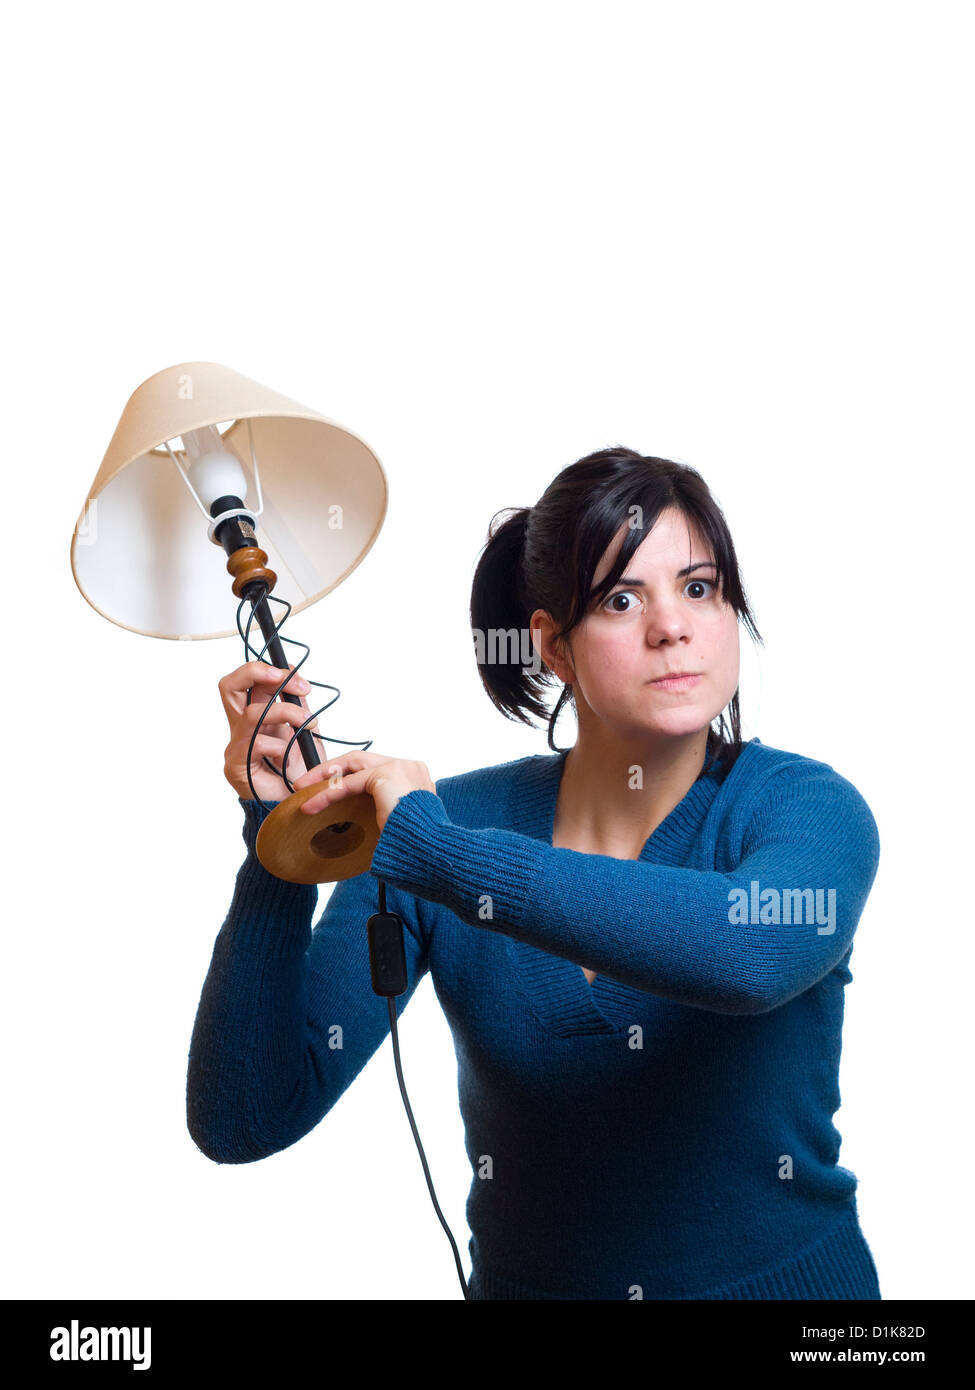 Young woman holding lamp in aggressive manner Stock Photo